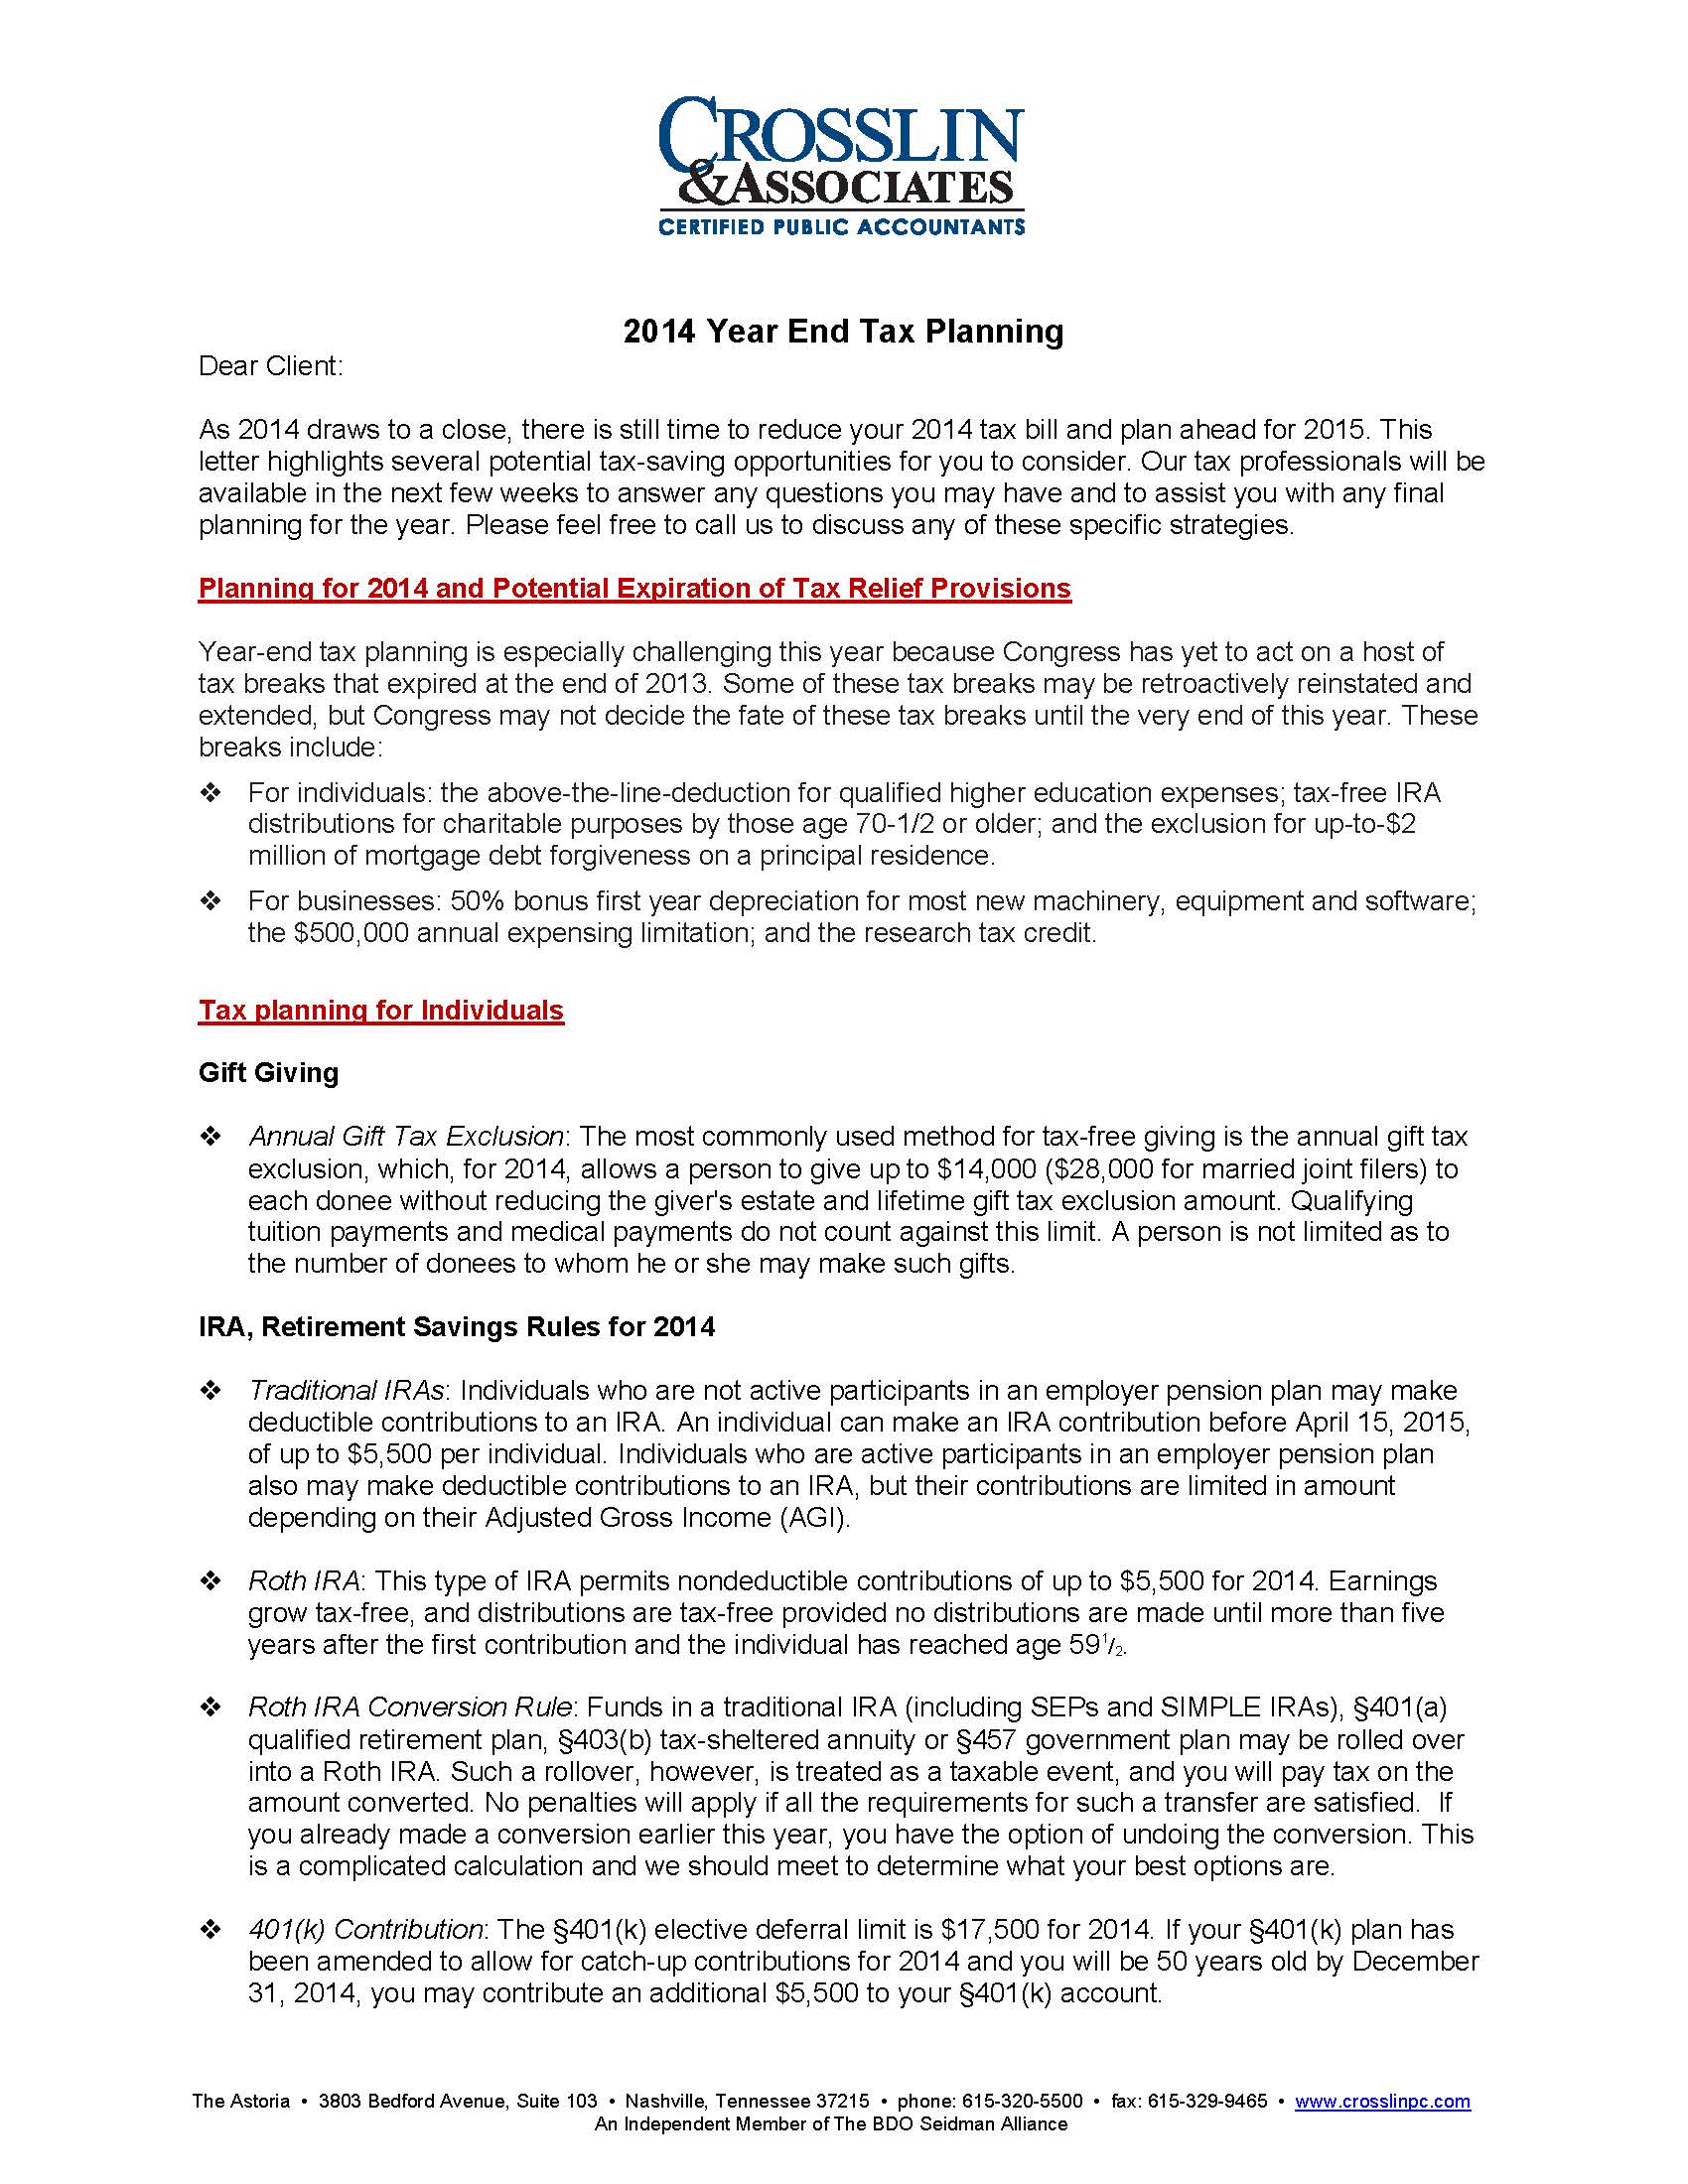 2014 CA Tax Planning Letter JPG only